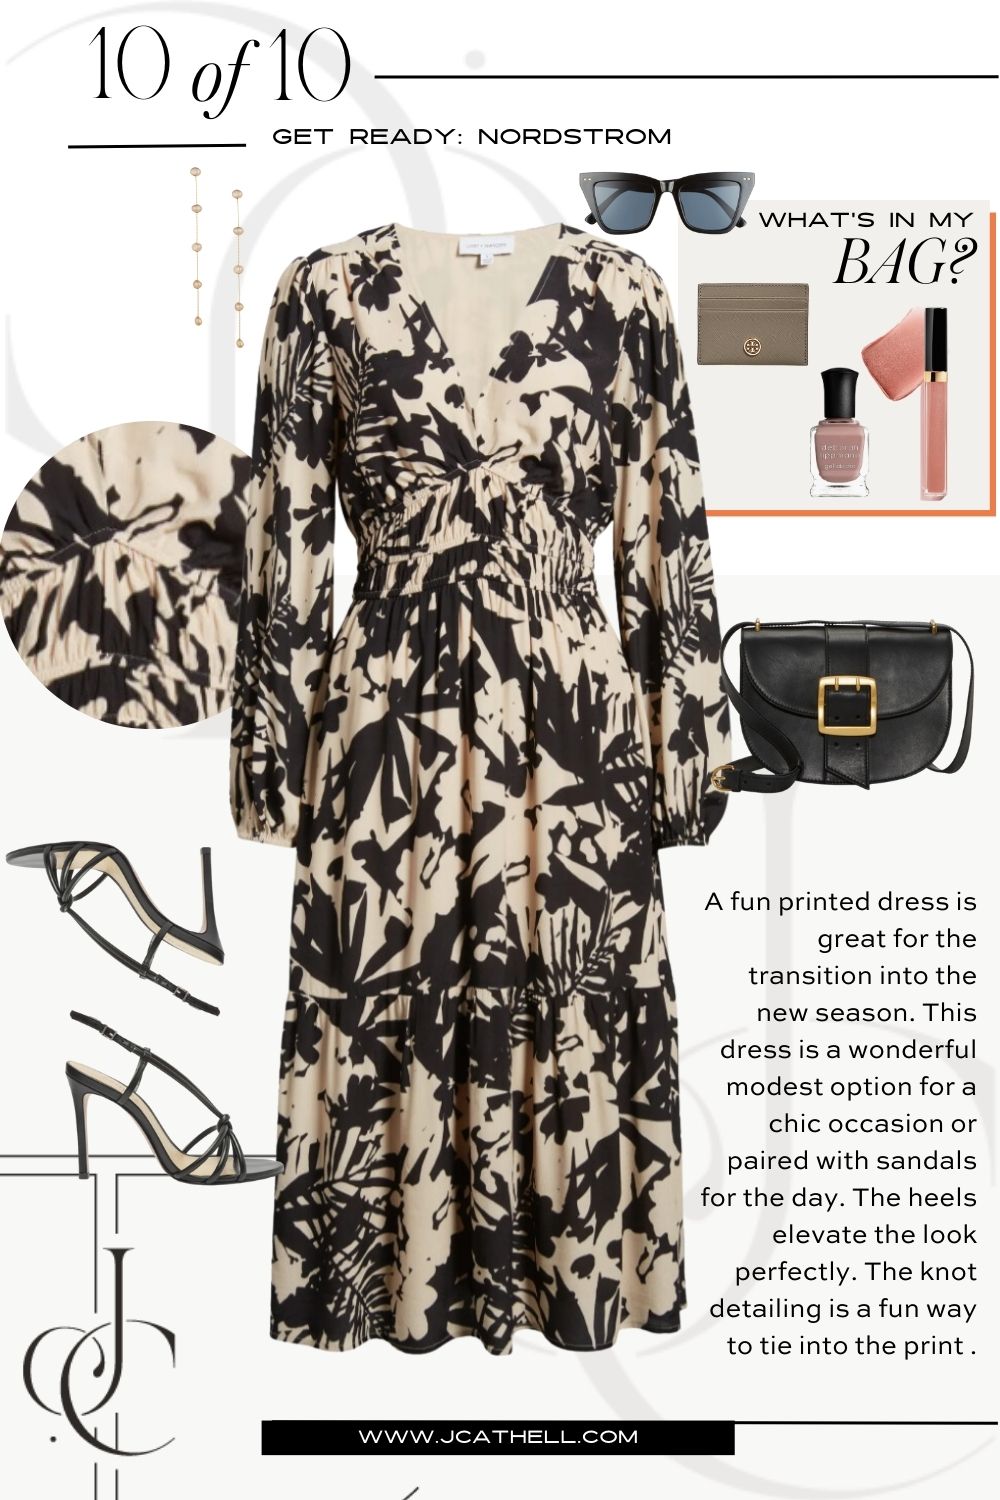 New Chic Fall Favorites with Nordstrom - J. Cathell